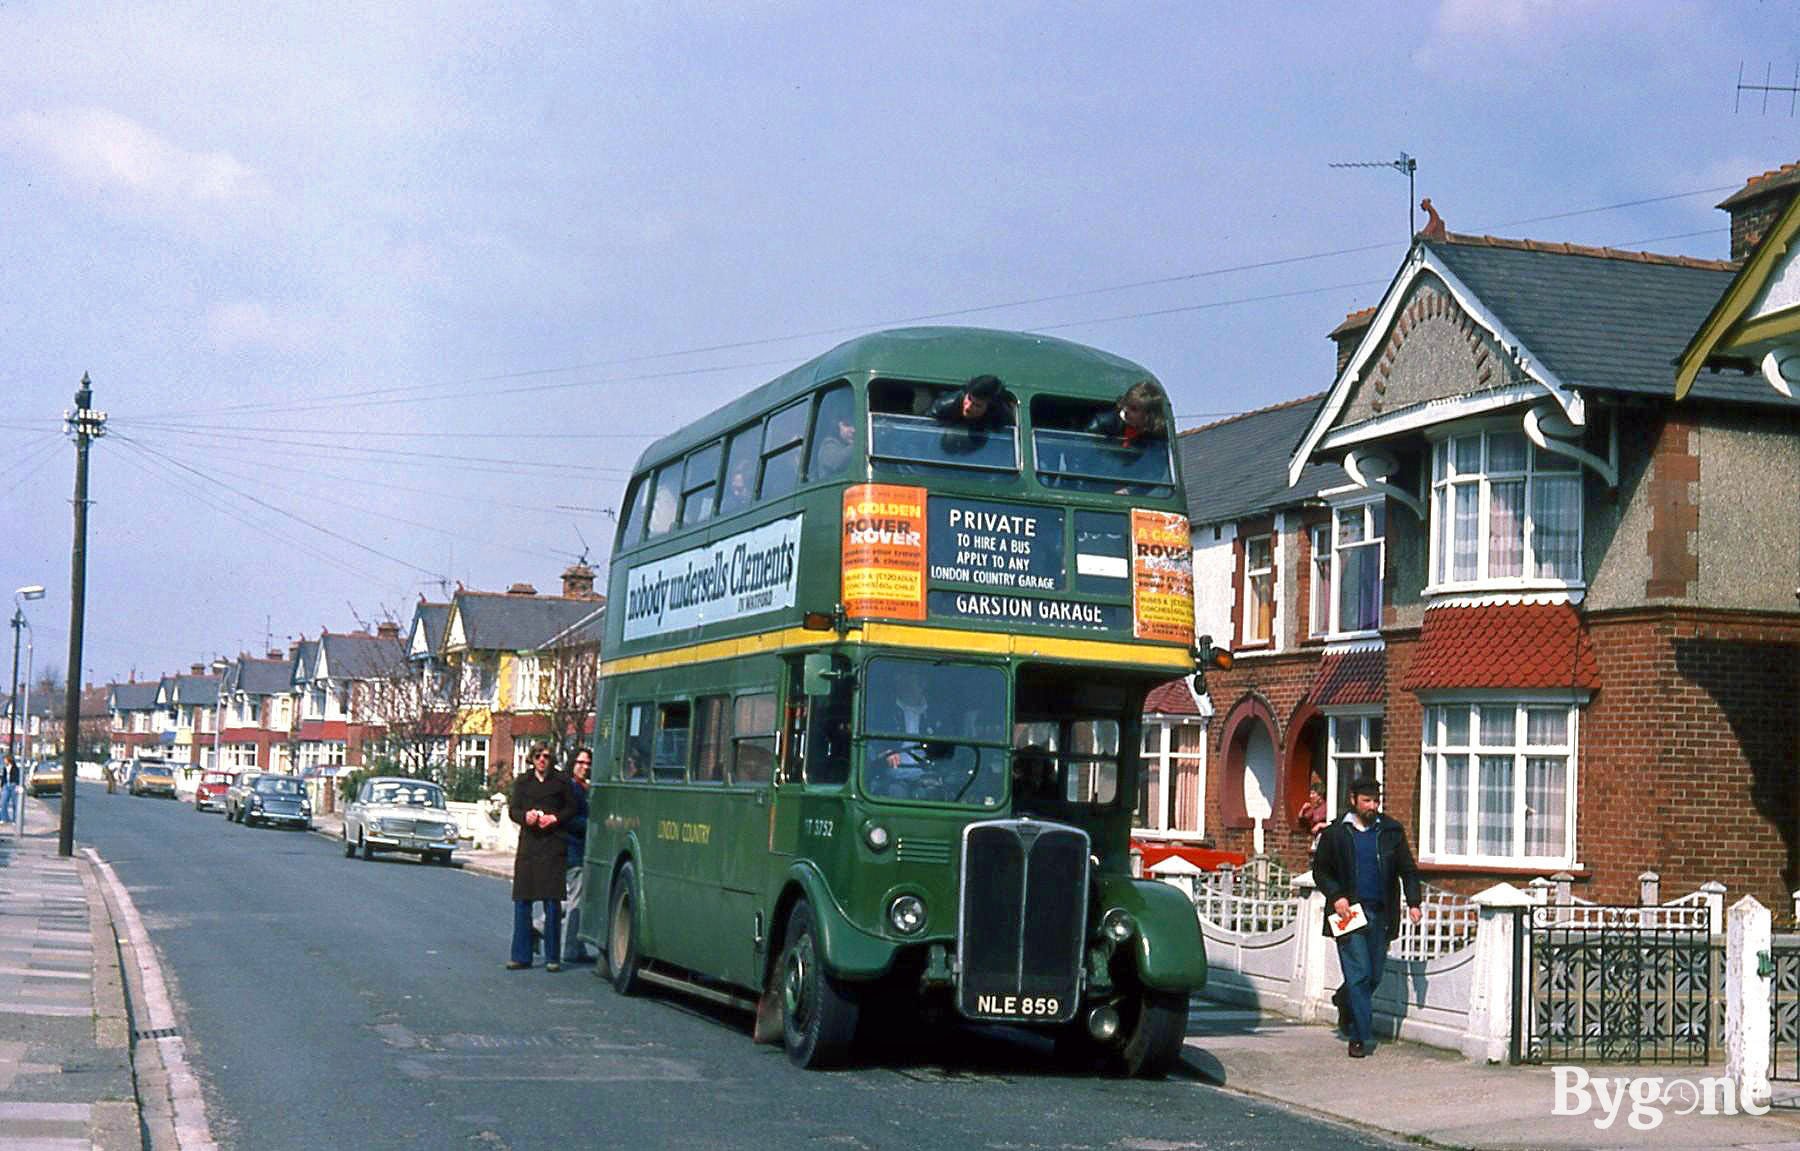 A green double decker is driving down a street with a private party of people on board. There are two people poking their heads out of the front windows on the top deck.